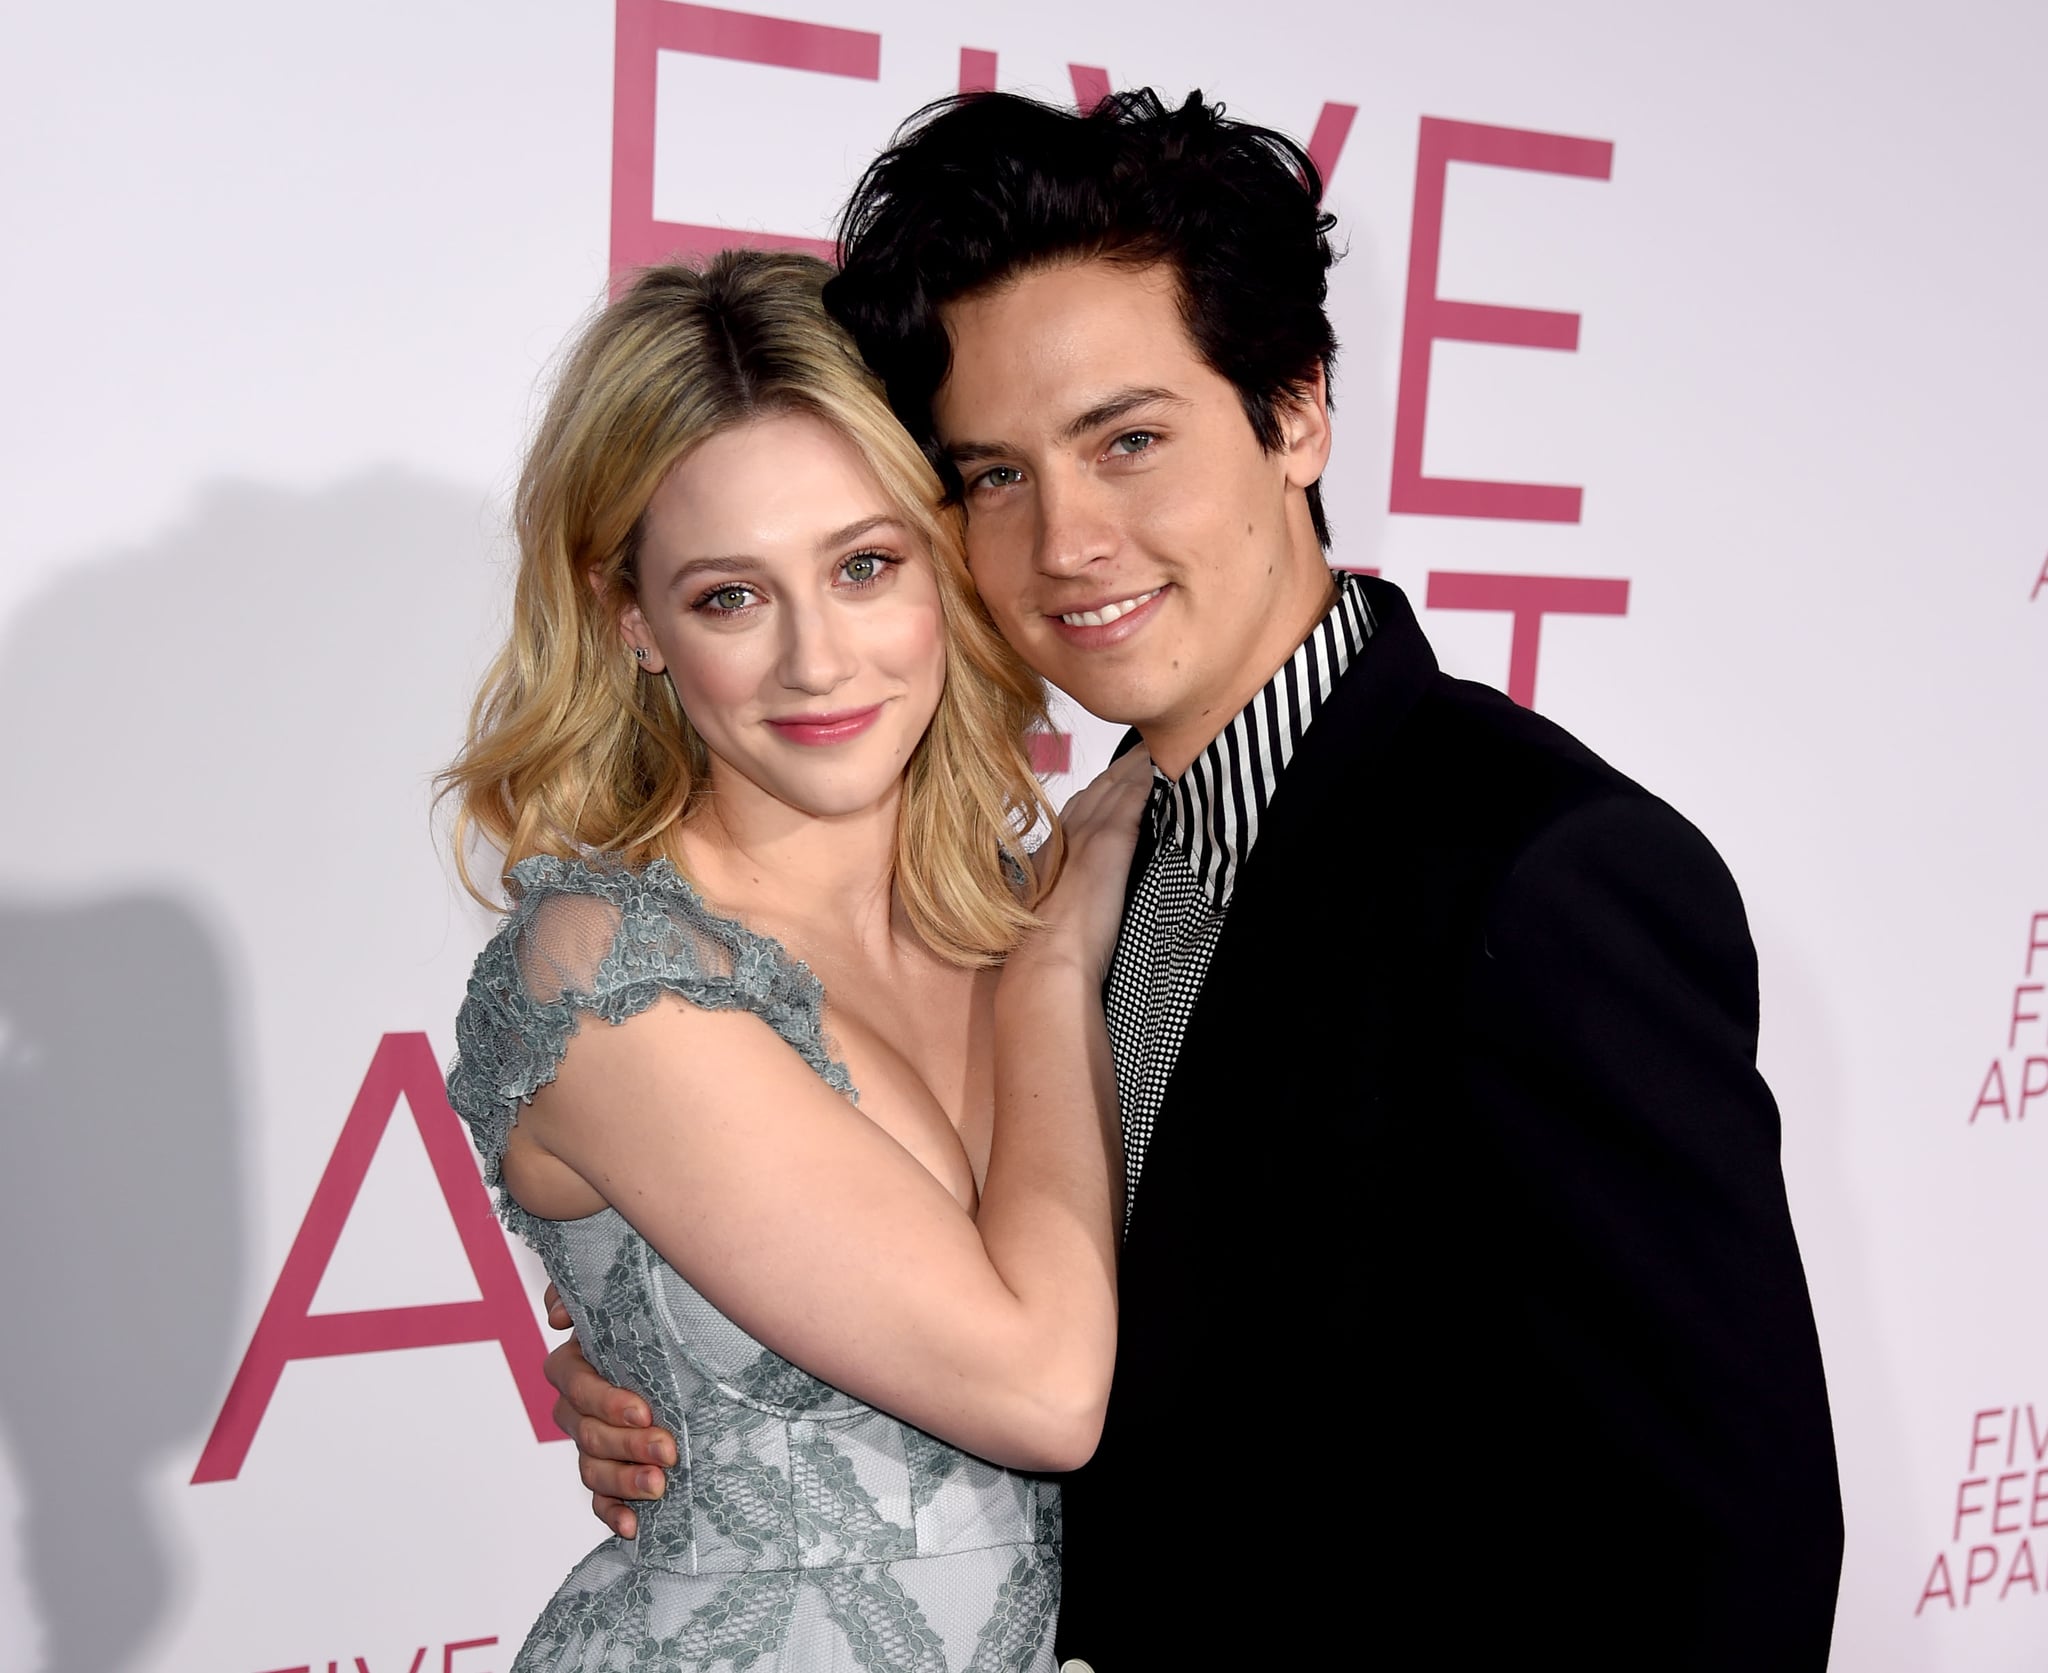 LOS ANGELES, CALIFORNIA - MARCH 07: Lili Reinhart (L) and Cole Sprouse arrive at the premiere of CBS Films